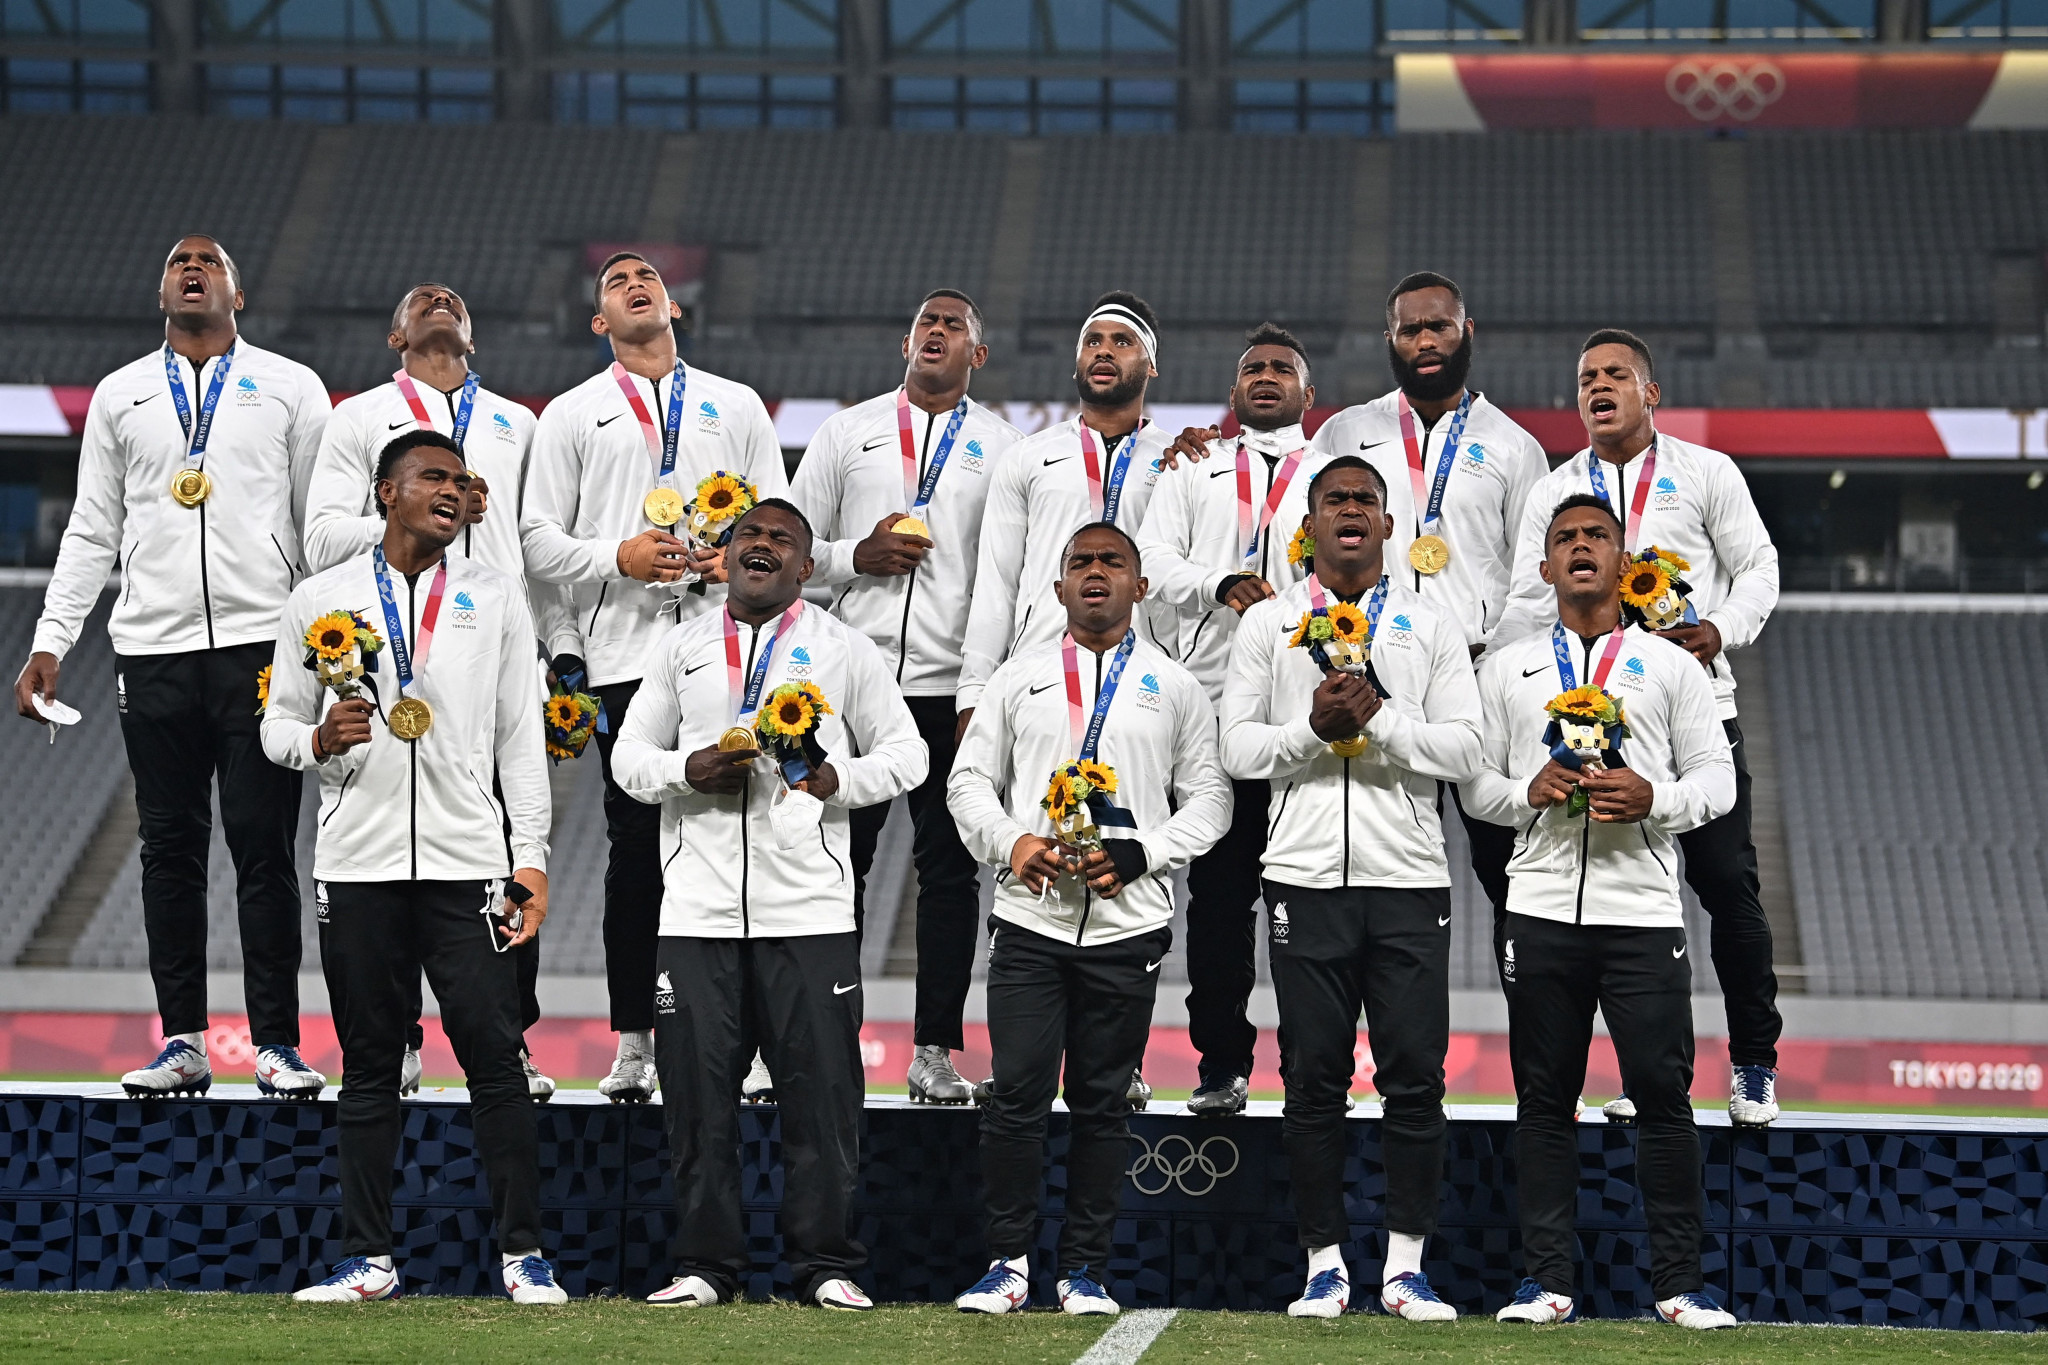 Fiji defended their men's rugby sevens Olympic title at Tokyo 2020 ©Getty Images